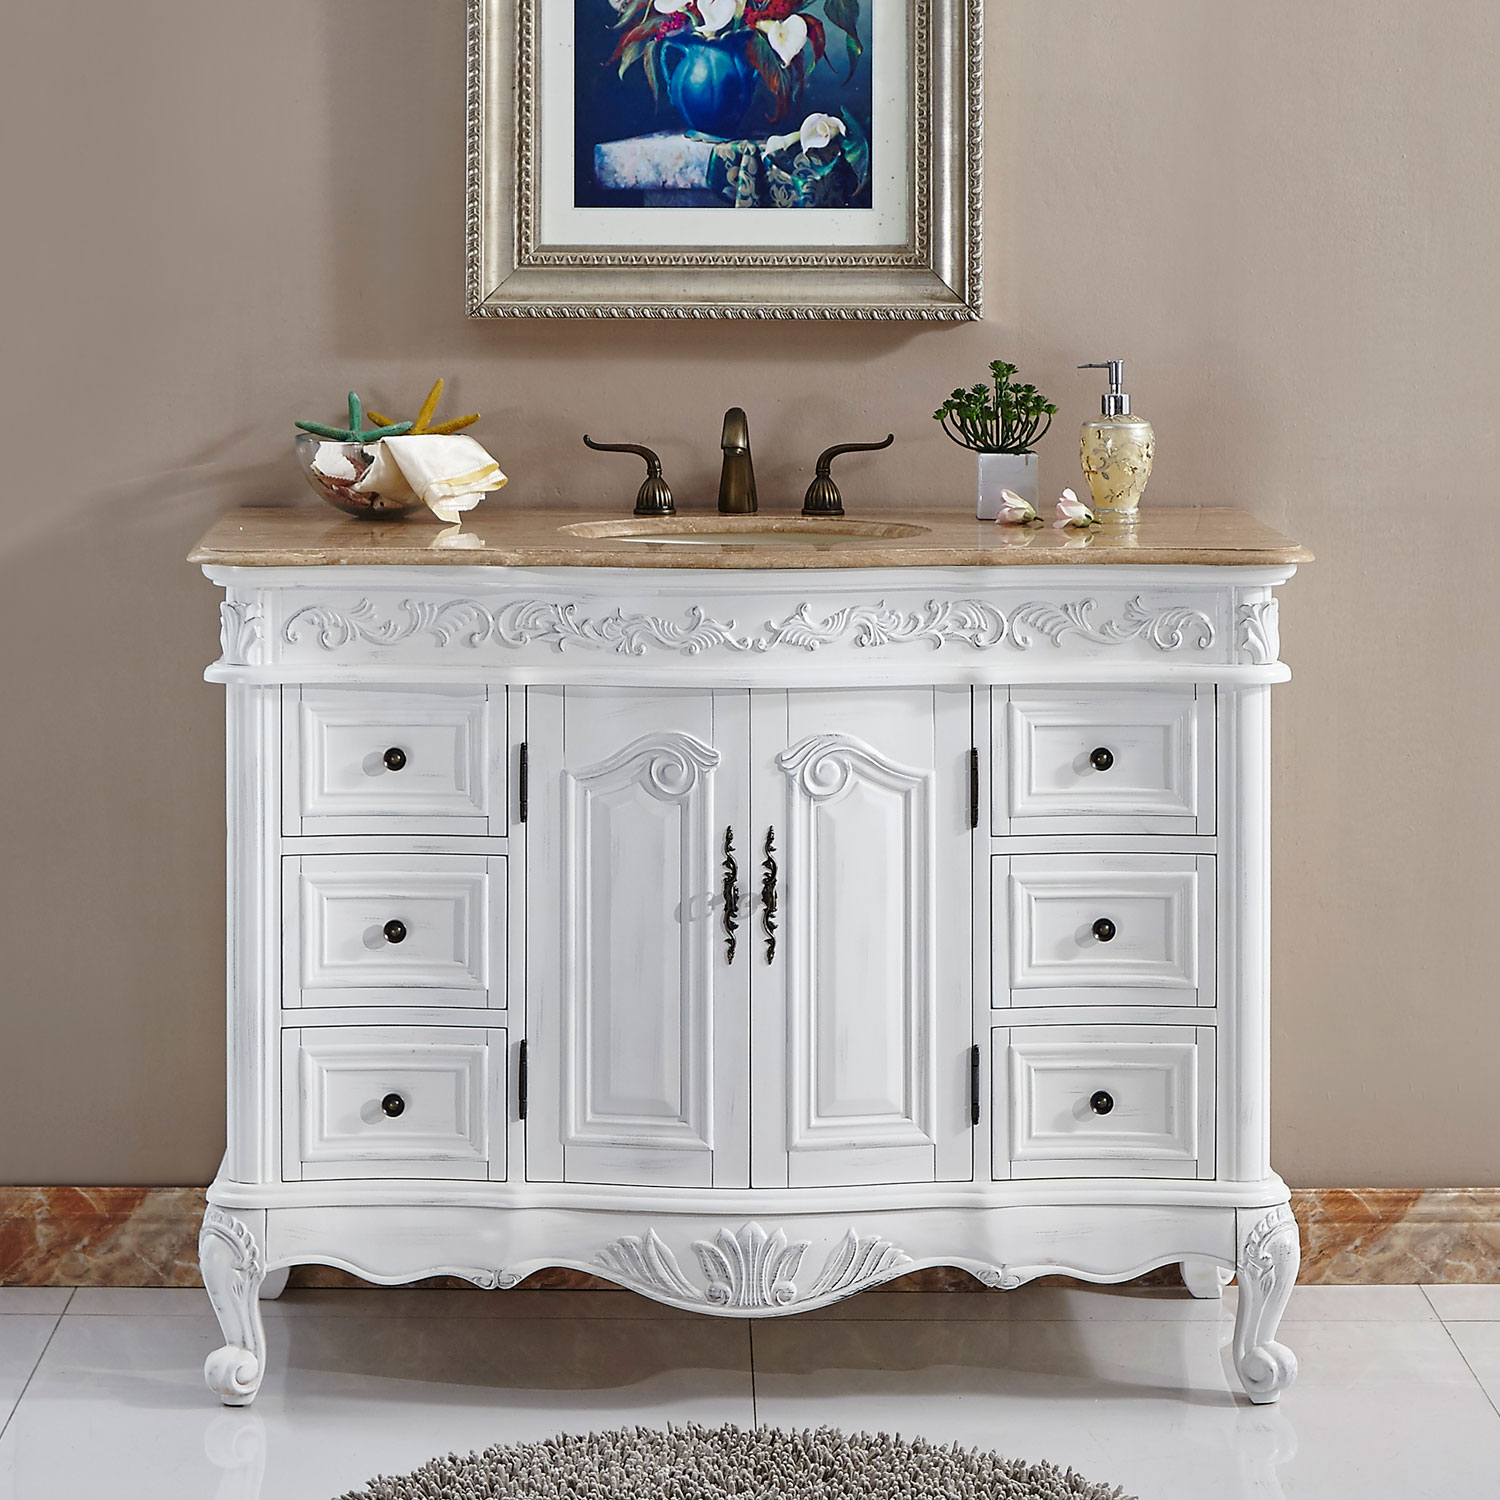 Accord Antique 48 inch Single Bathroom Vanity French Edged Top